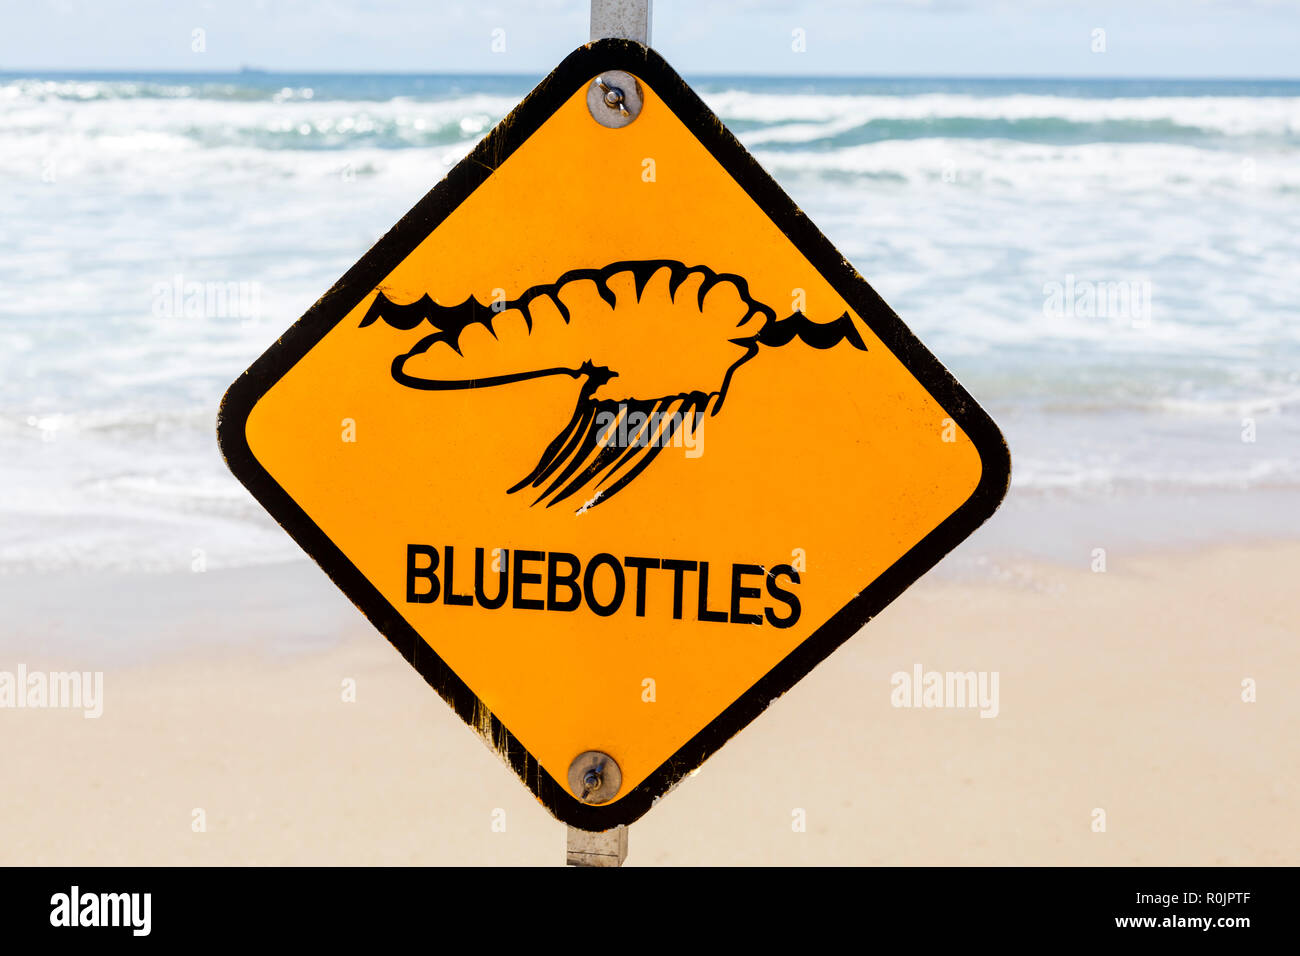 Bluebottles, or Portuguese Man-of-War, is one of the many warning signs on the beaches during summer in Queensland, Australia Stock Photo